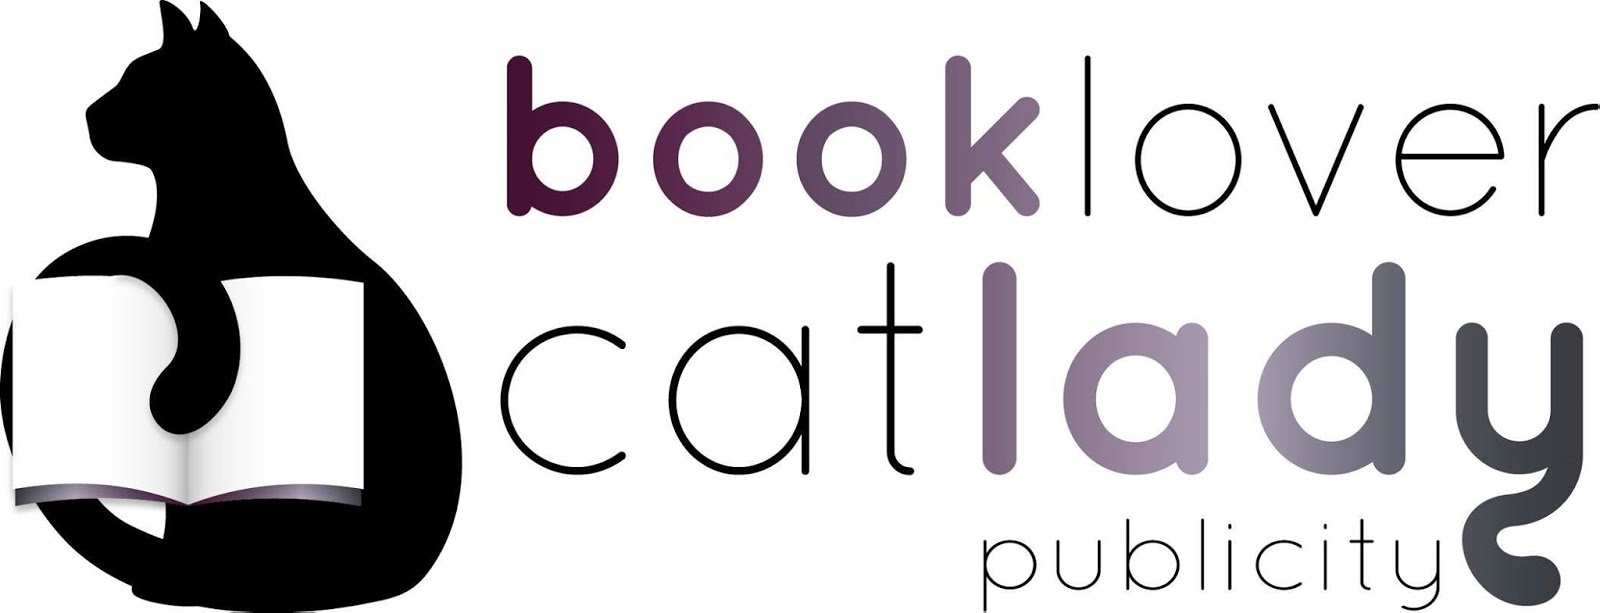 Booklover Catlady Publicity